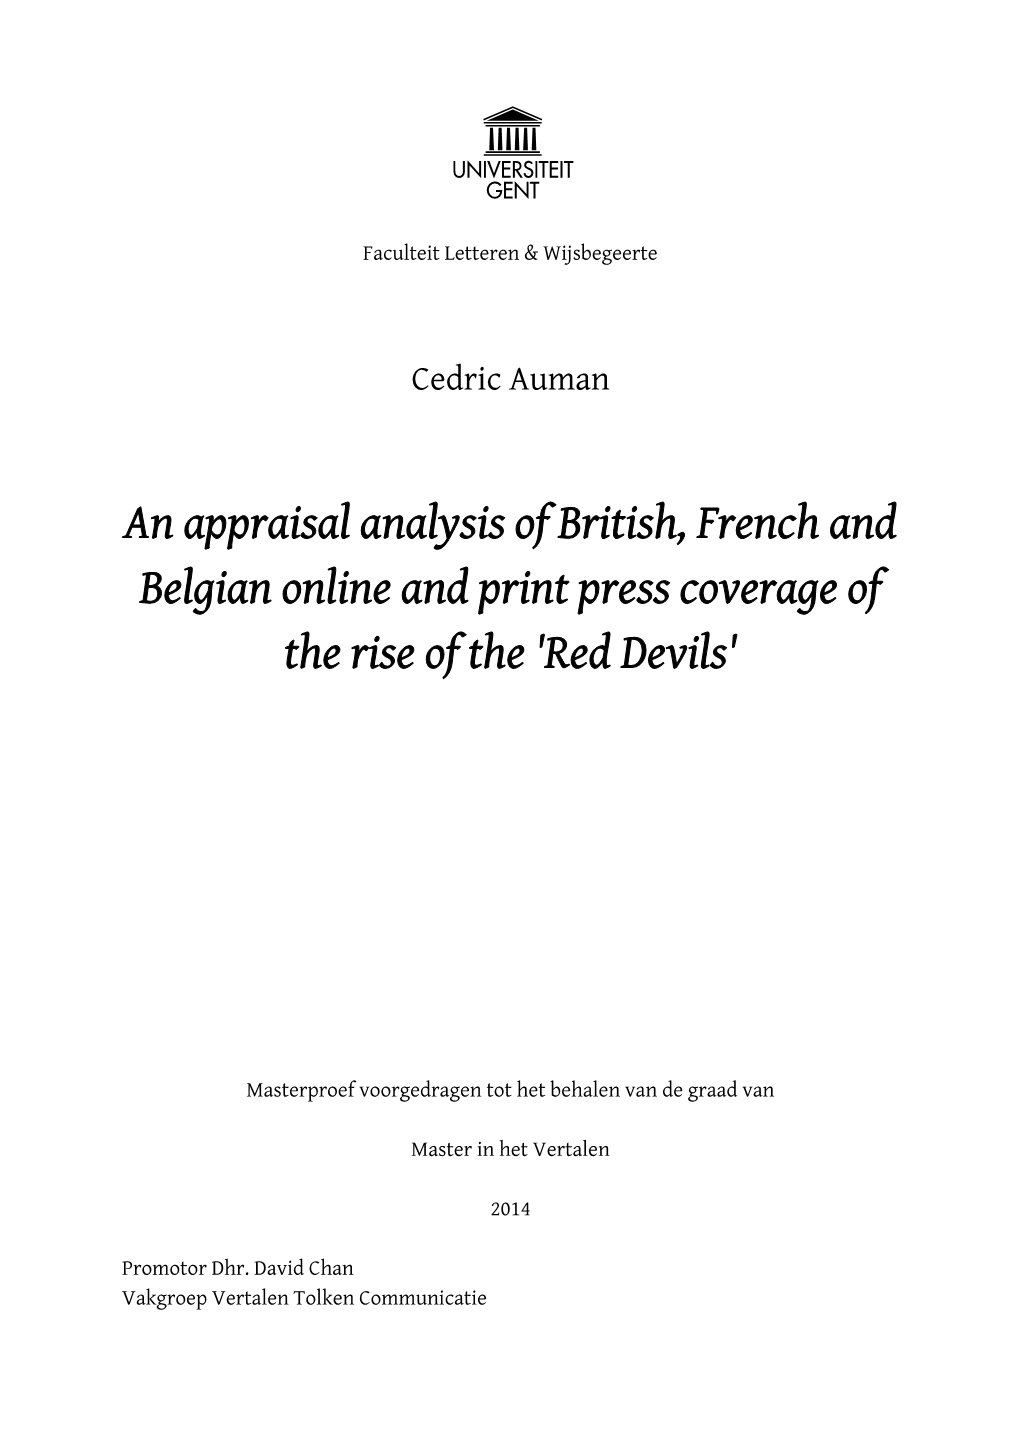 An Appraisal Analysis of British, French and Belgian Online and Print Press Coverage of the Rise of the 'Red Devils'